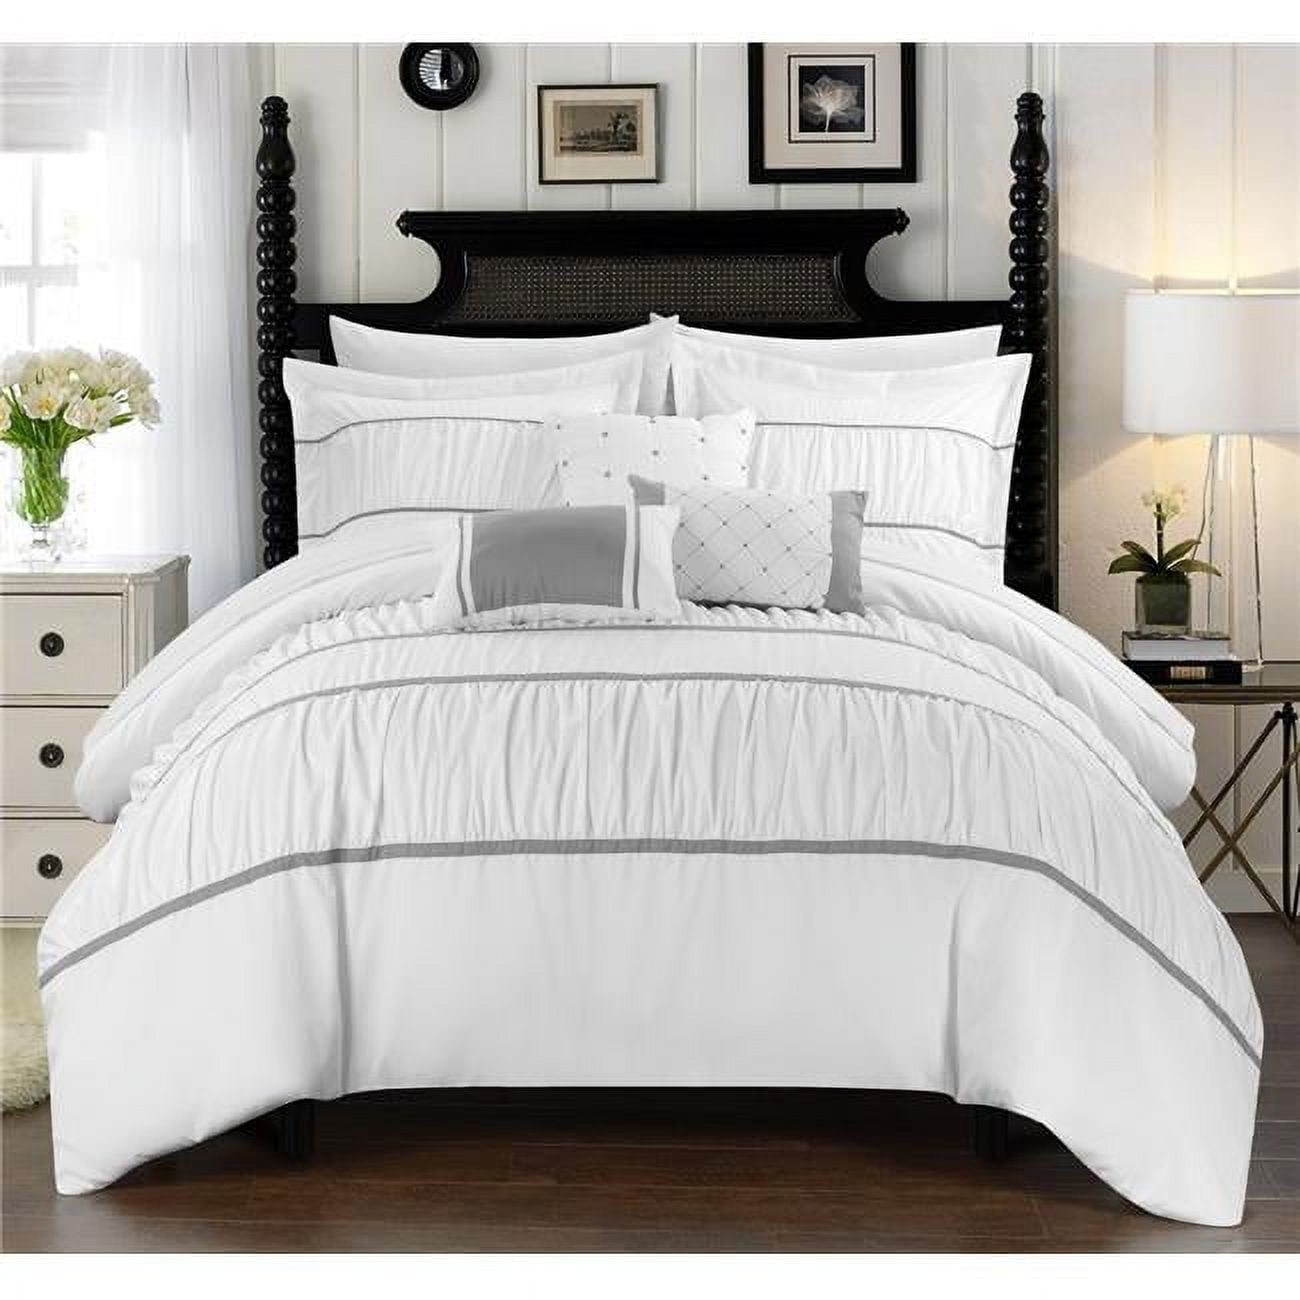 Penelope Pleated & Ruffled Bed In A Bag Comforter Set With Sheets - White - Queen - 10 Piece